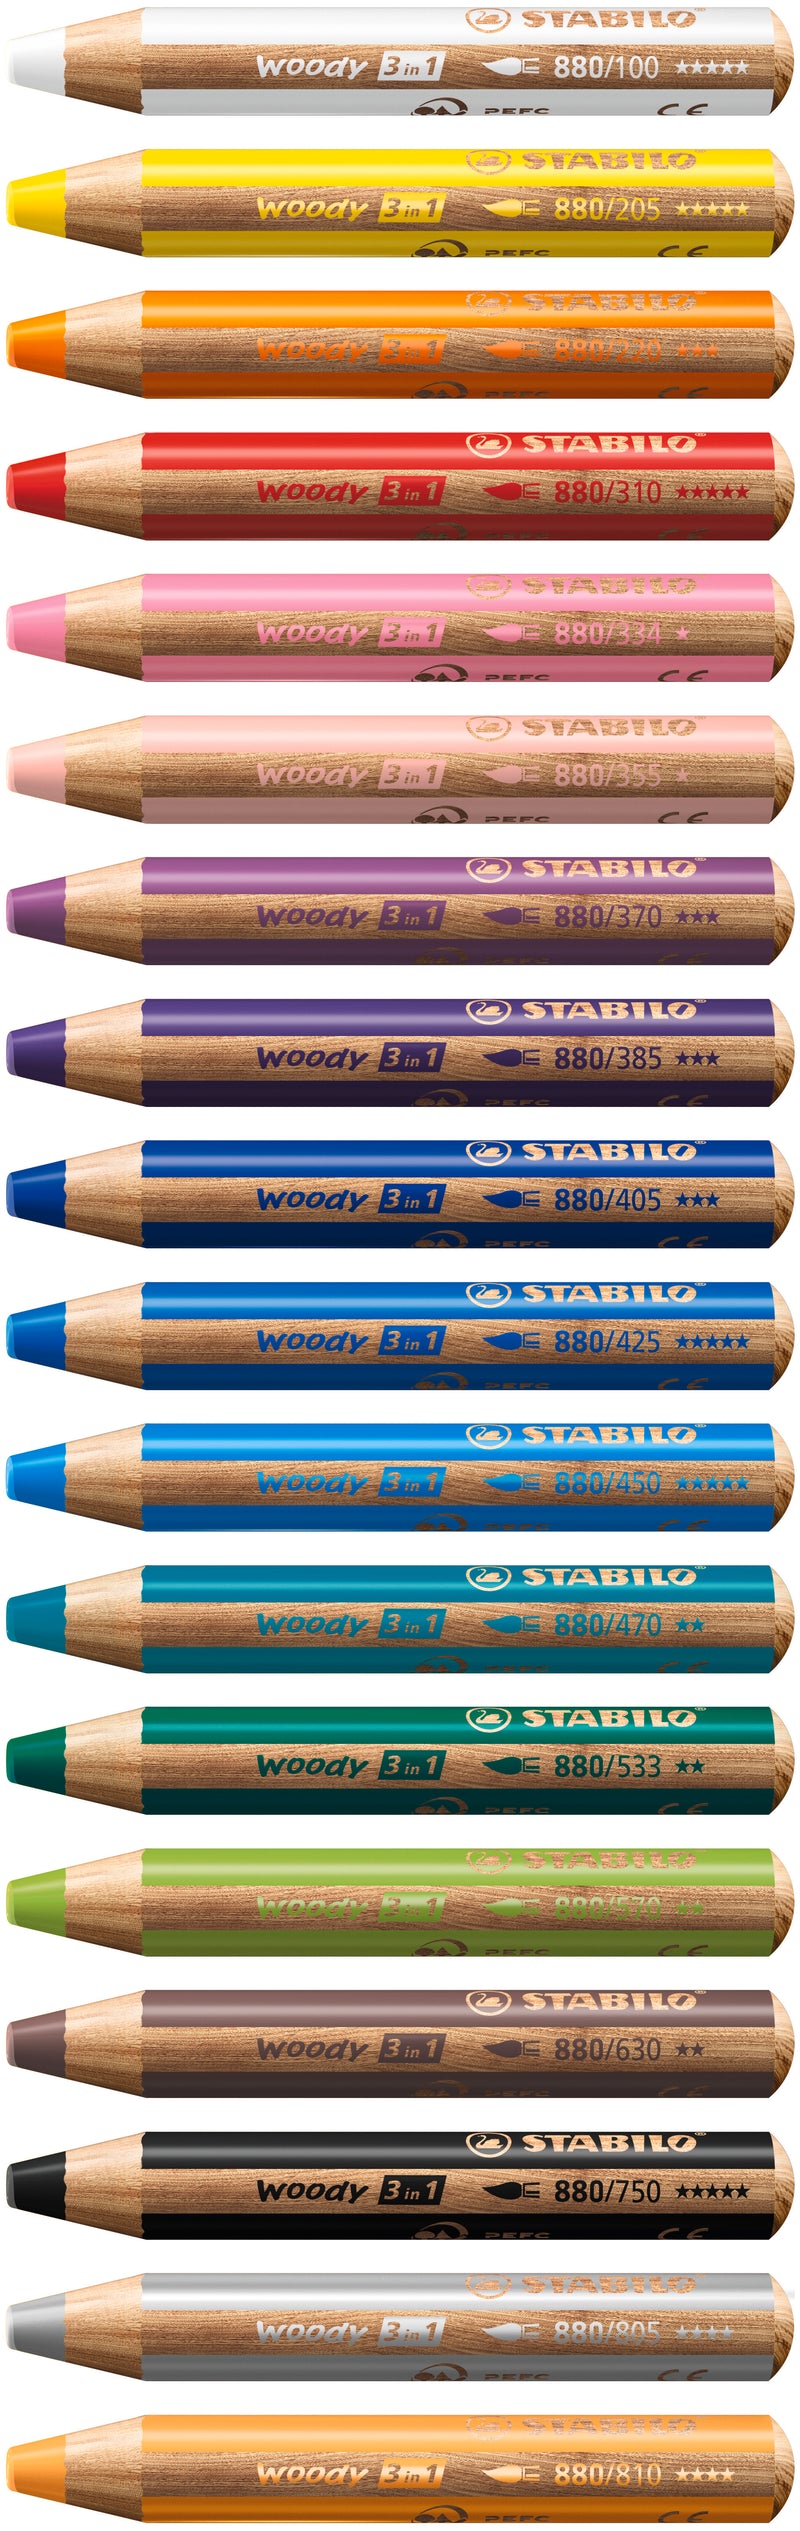 IBUREAU 72  CRAYONS MULTI-TALENTS STABILO WOODY 3IN1 + 1 TAILLE